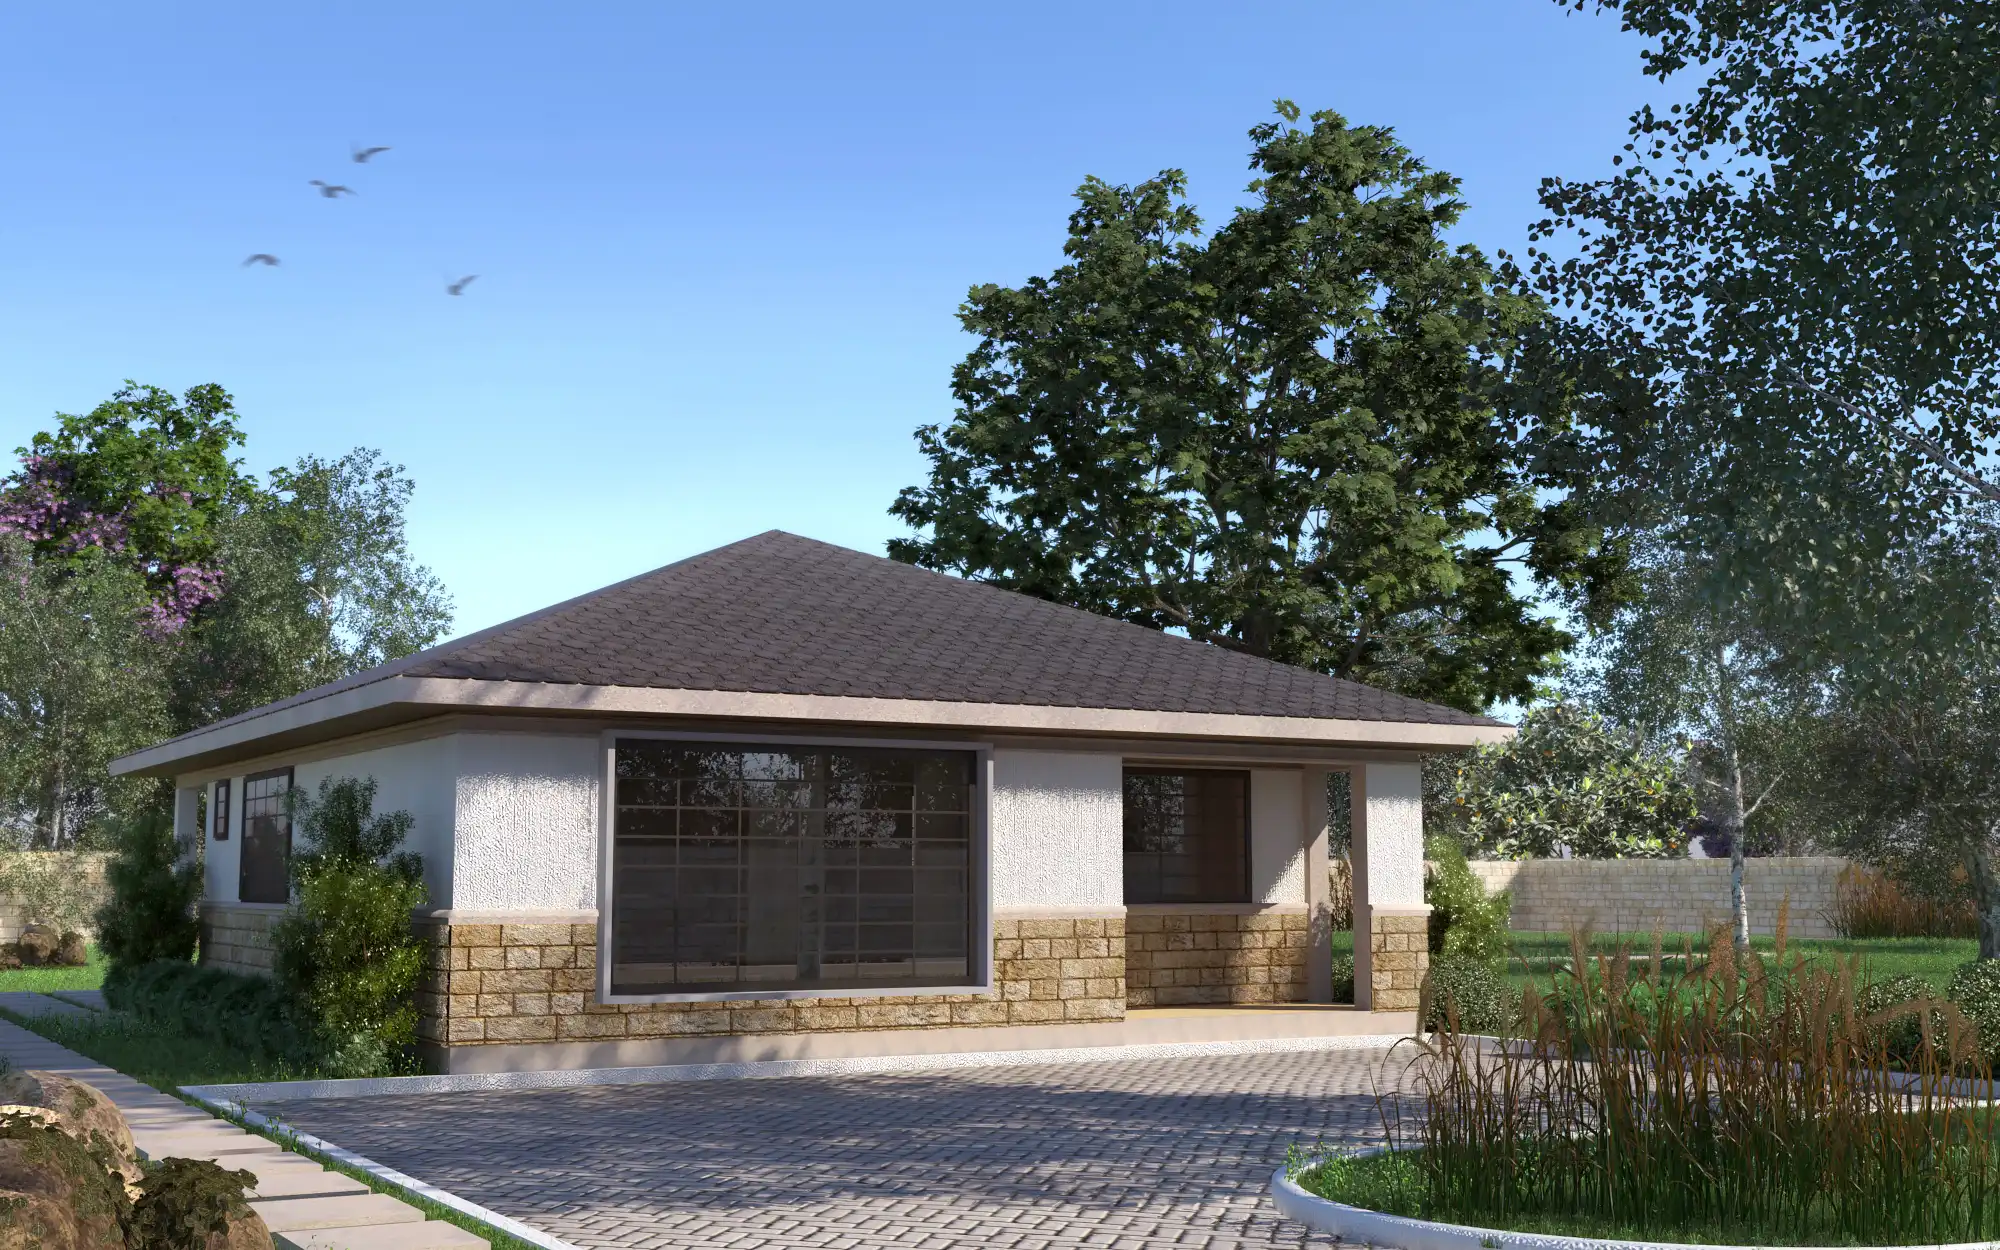 2 Bedroom Bungalow -ID 2112 - 2 BED BNGL TP1 OP2 FRONT.jpg from Inuua Tujenge house plans with 2 bedrooms and 1 bathrooms. ( bungalow )